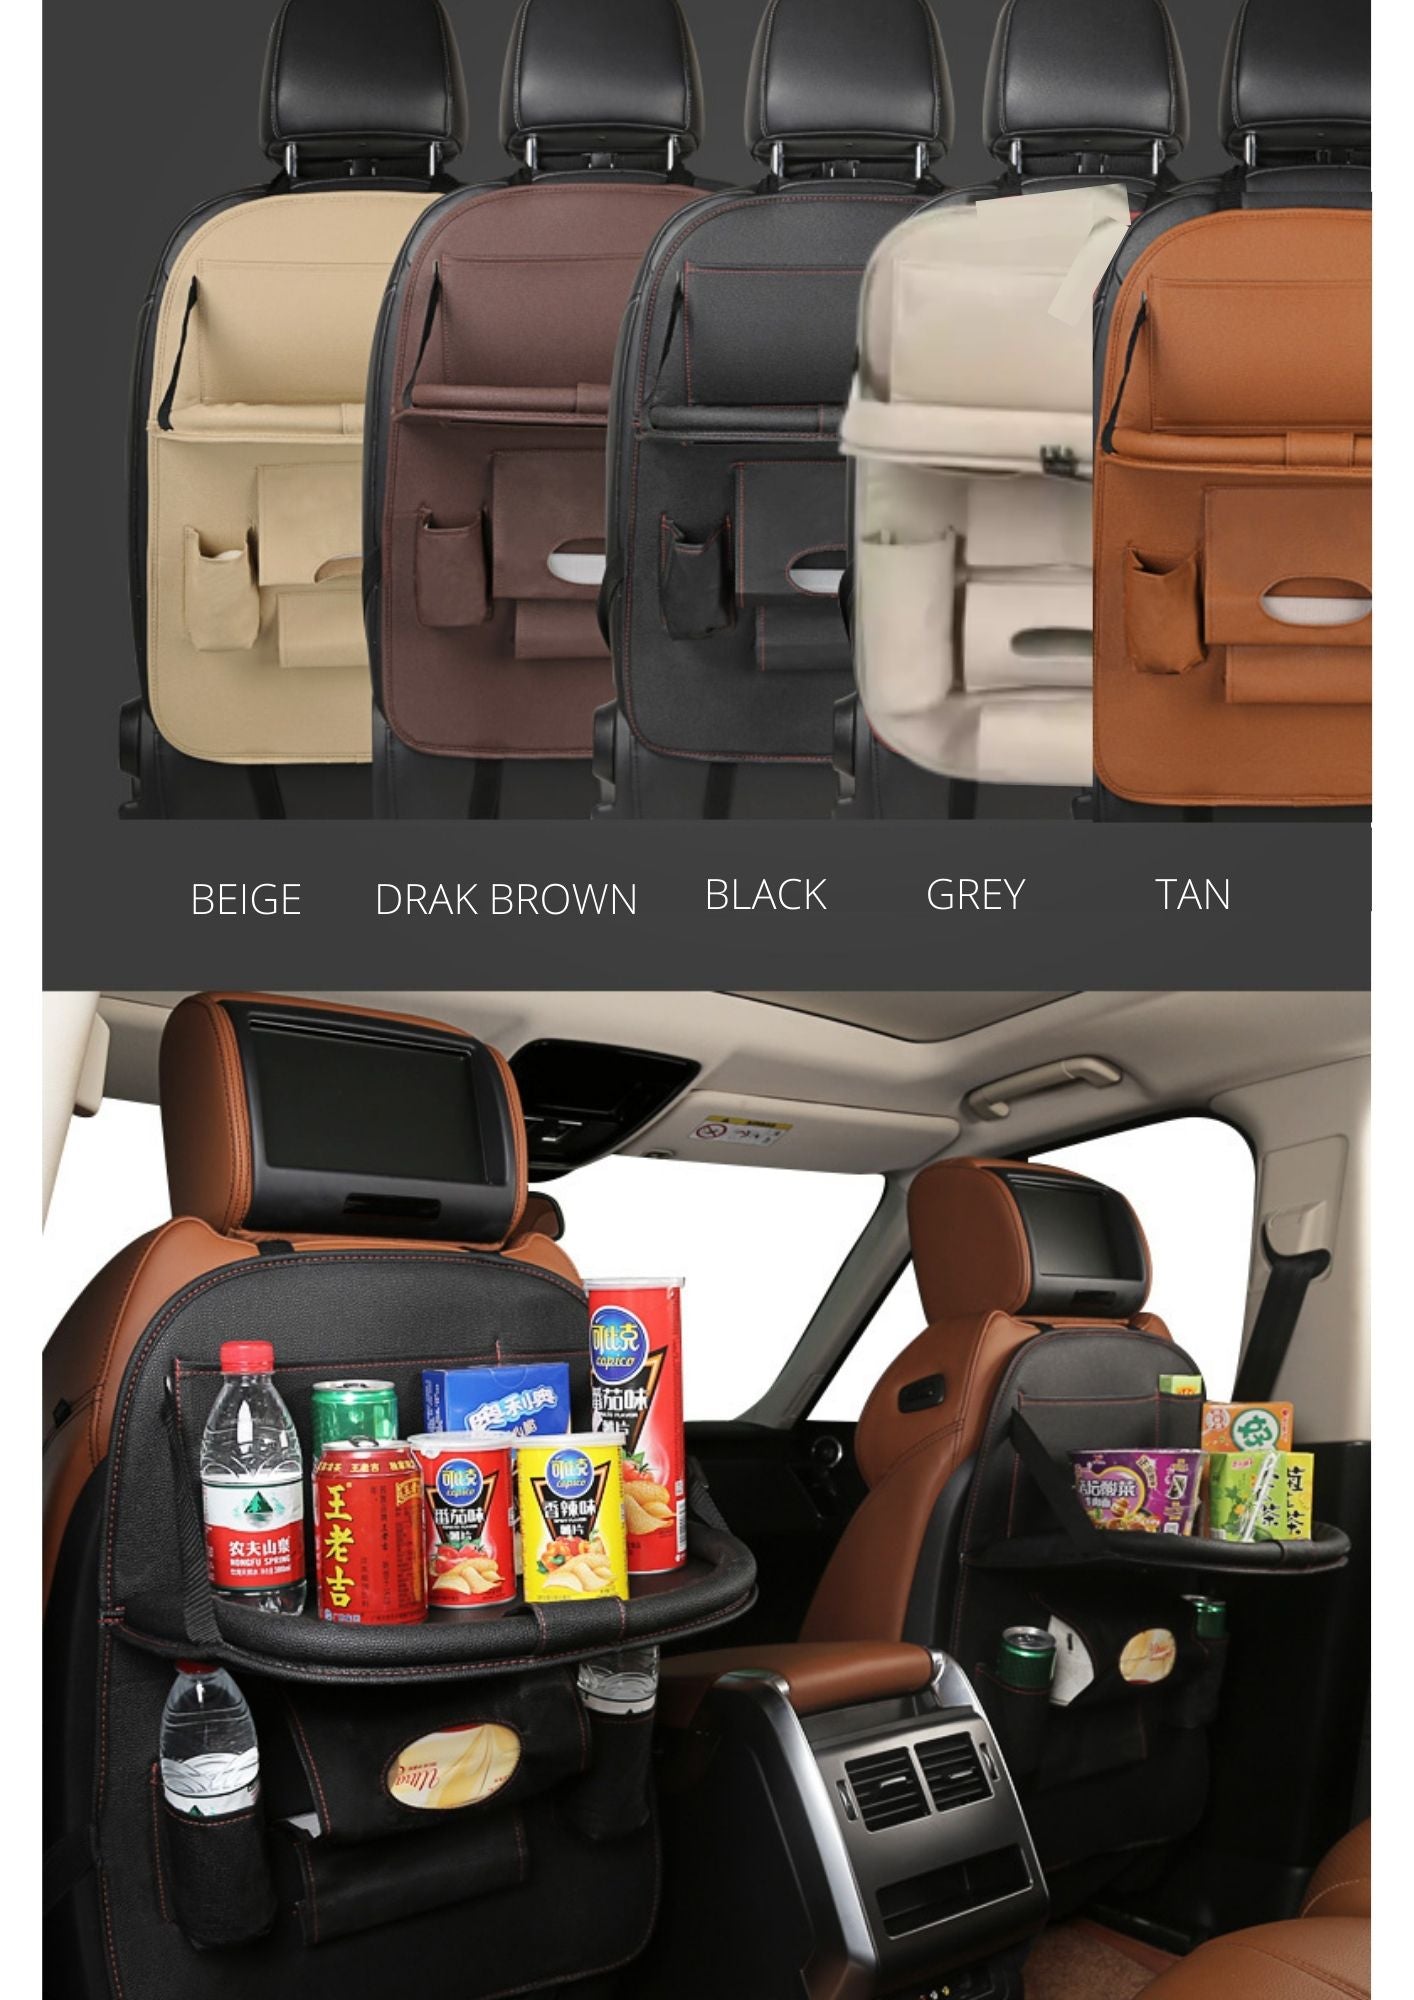 Oshotto Car Backseat Storage Organizer with Foldable Tray, Multi-Pocket for Bottles, Tissue Boxes Compatible with All Cars (Brown)